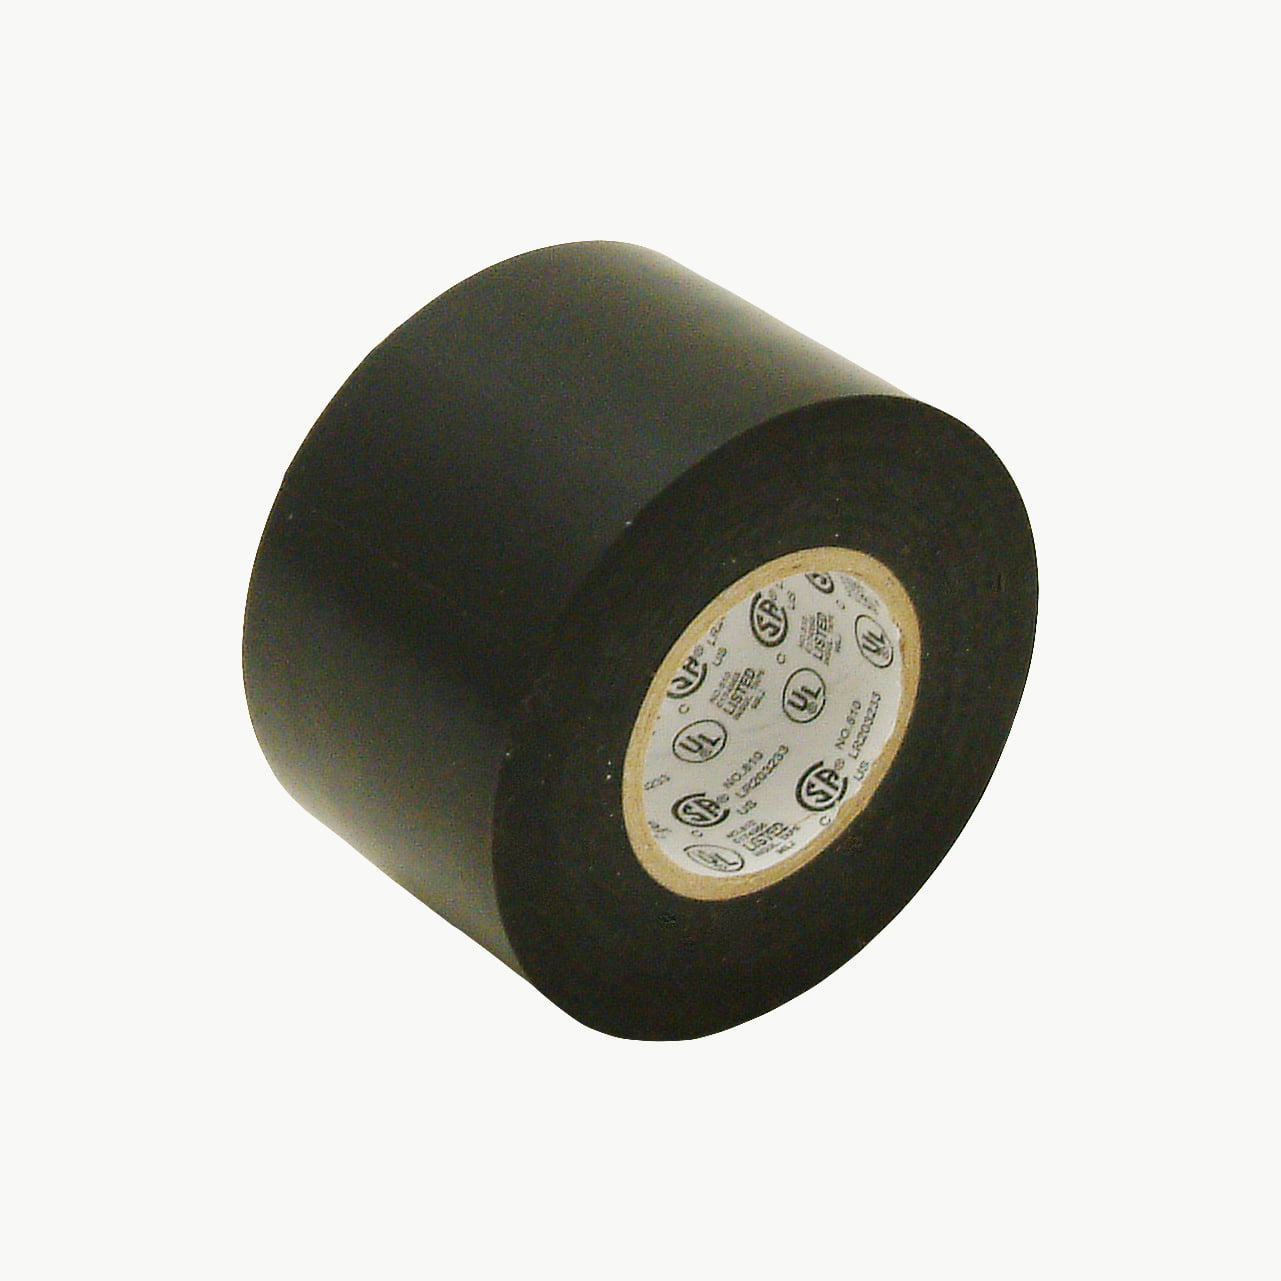 .. JVCC EL7566-AW Synthetic Rubber Electrical Tape 2 in x 66 ft Free Shipping 